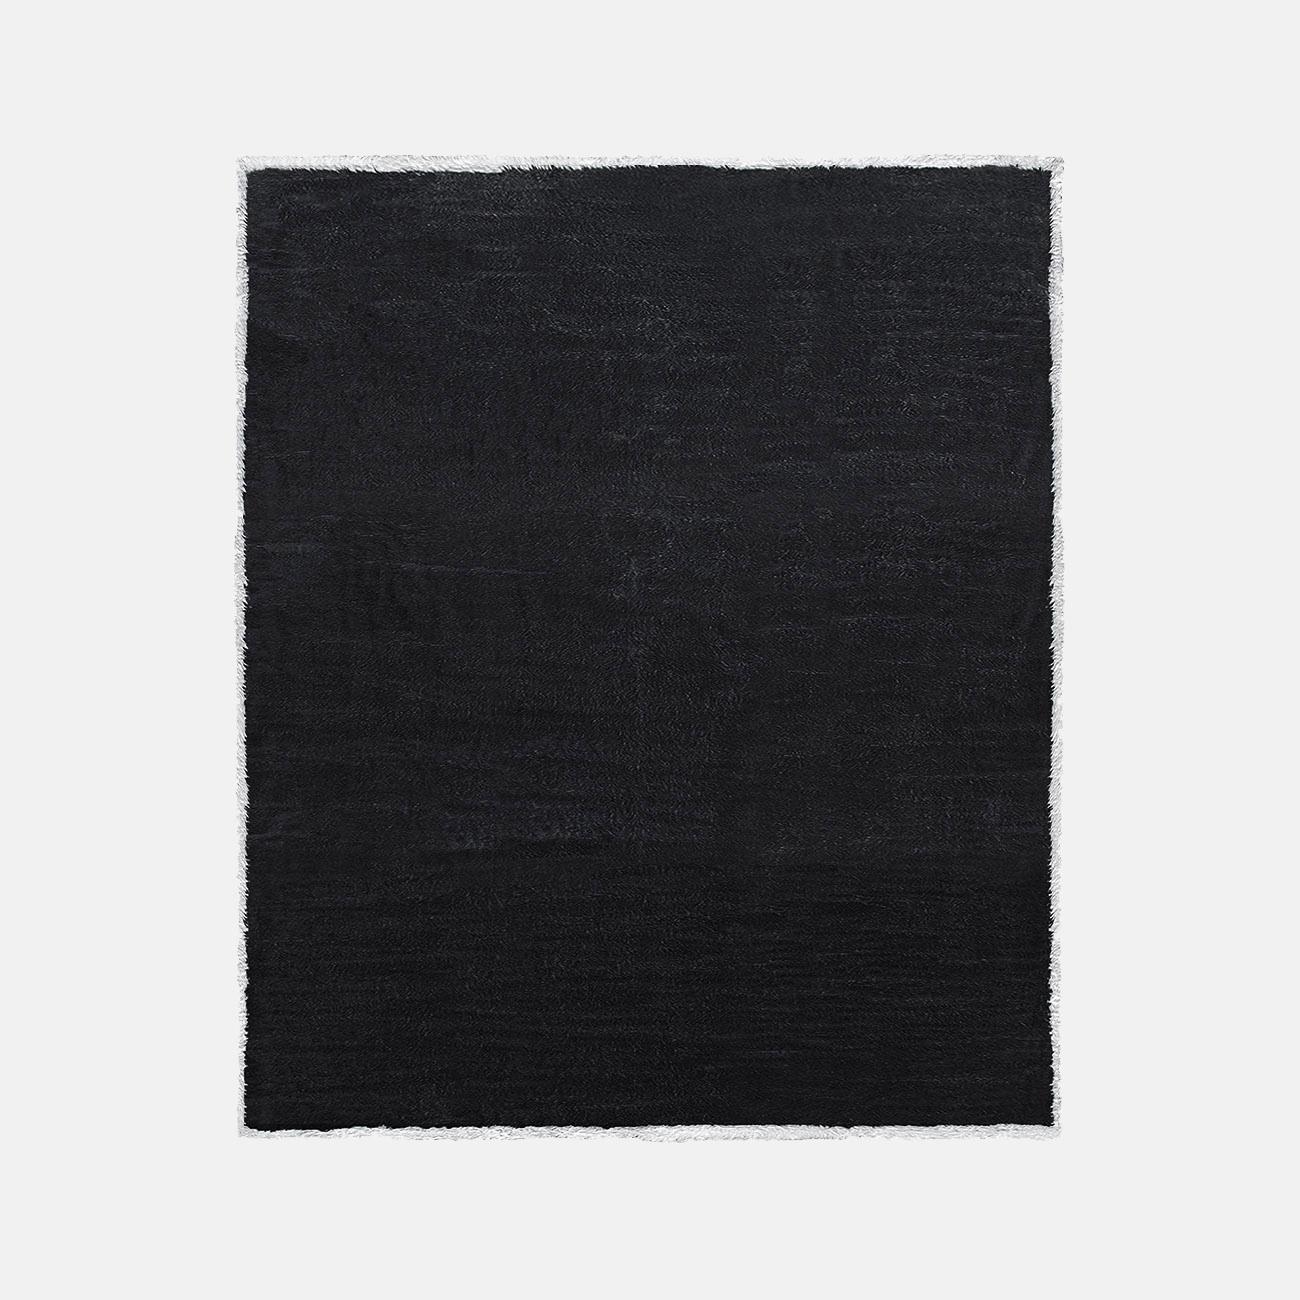 Kimoto Frame Maggio Night Rug by Atelier Bowy C.D.
Dimensions: W 243 x L 300 cm.
Materials: Wool, silk.

Available in D170, D200, D240, W140 x L220, W170 x L240, W210 x L300, W243 x L300 cm.

Atelier Bowy C.D. is dedicated to crafting contemporary